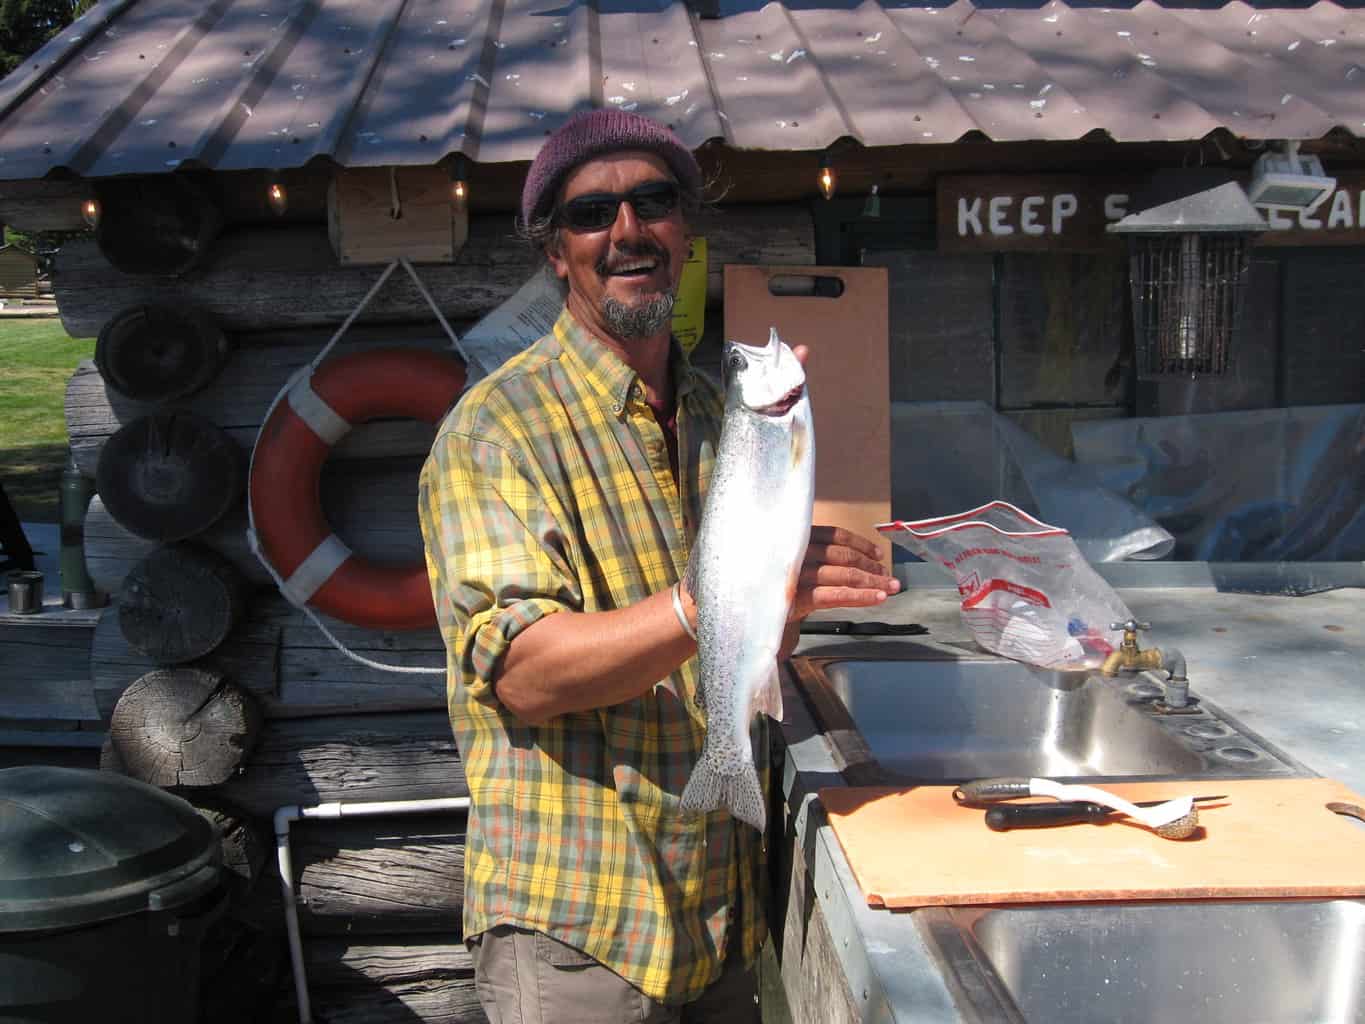 An angler holding a rainbow trout beside the cleaning station.